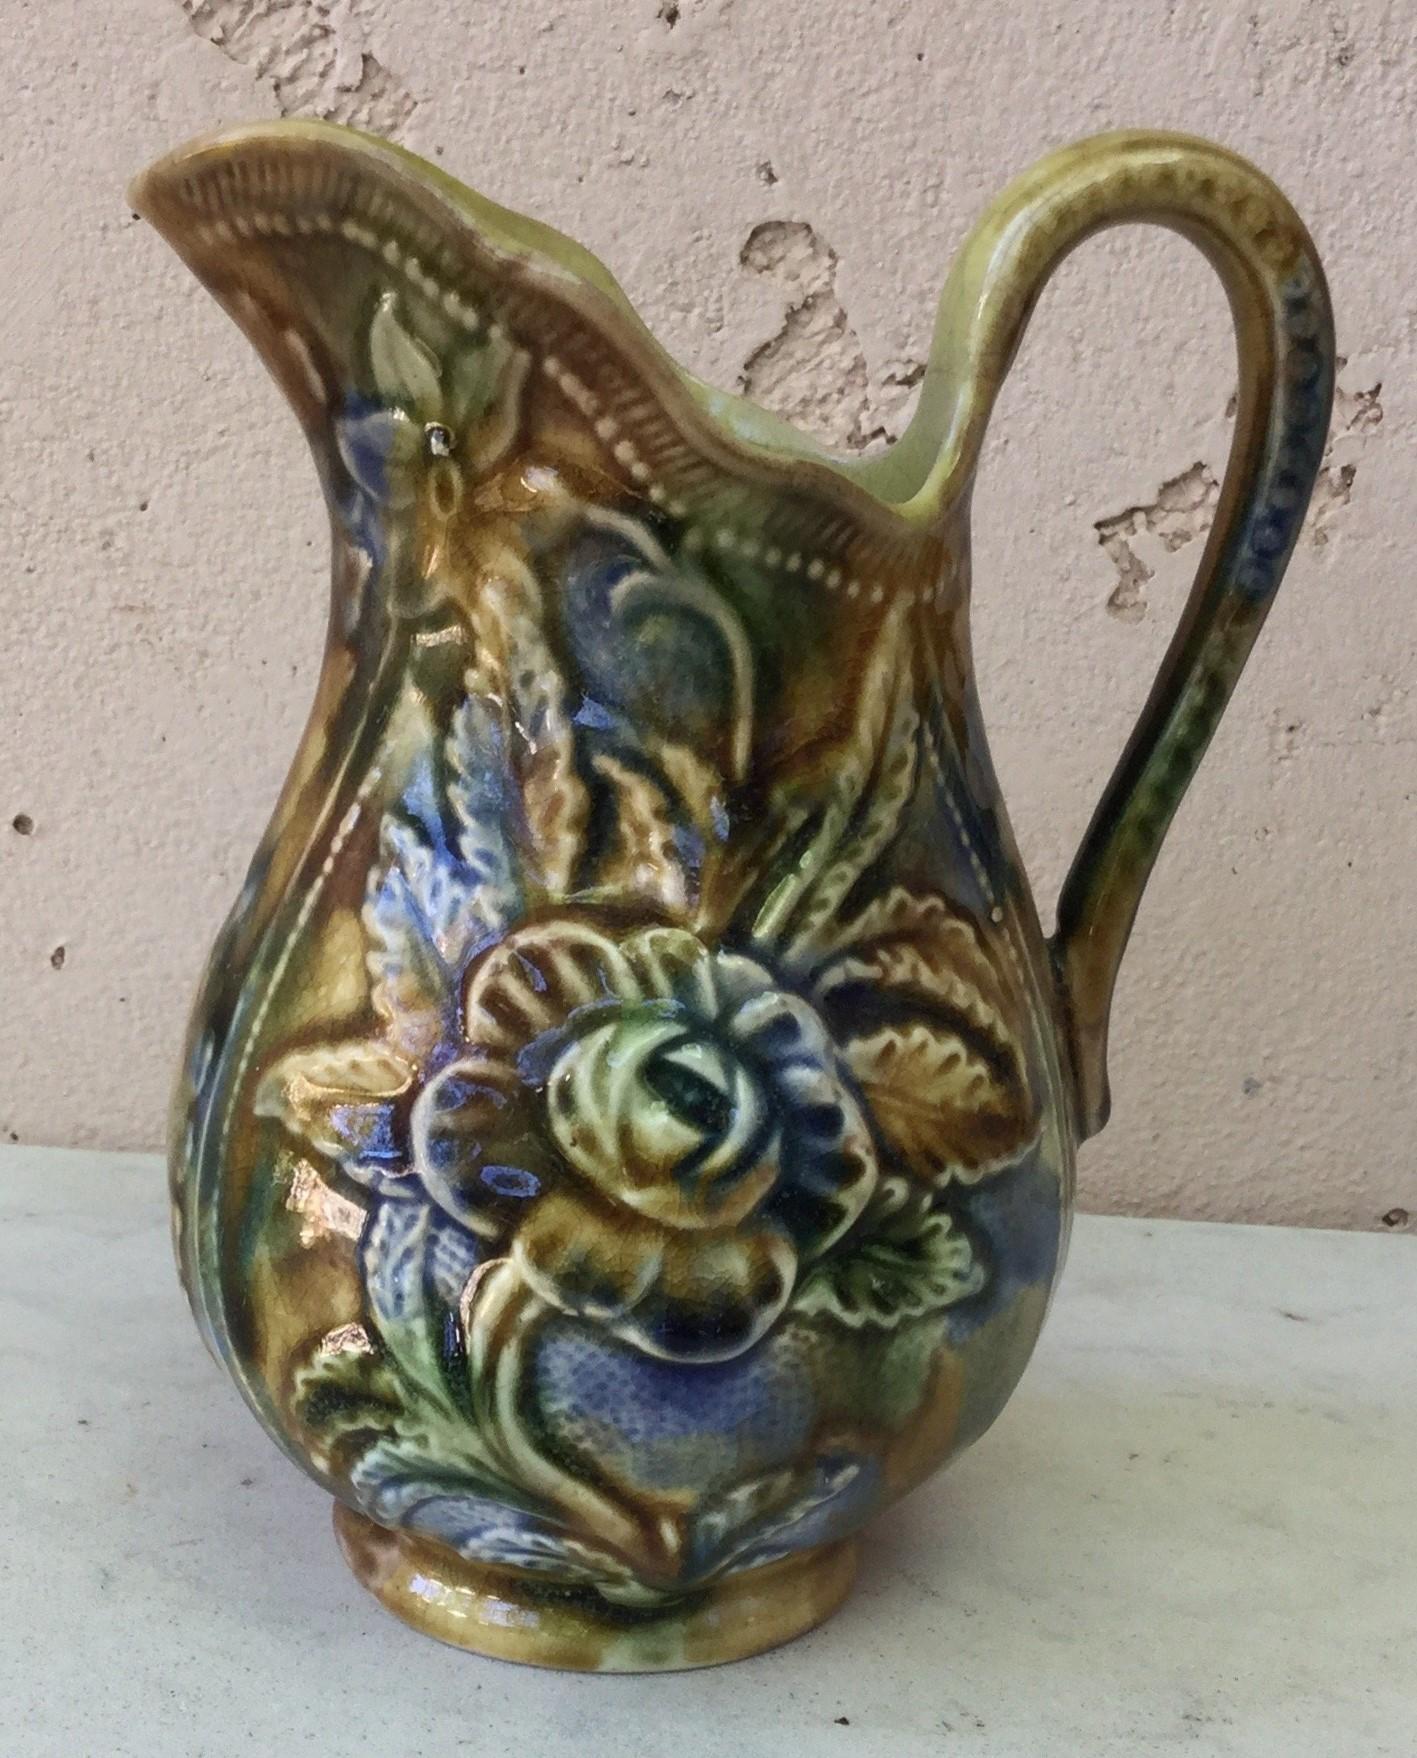 Small Majolica pitcher mottled blue brown yellow and green circa 1890 decorated with rose and others flowers.